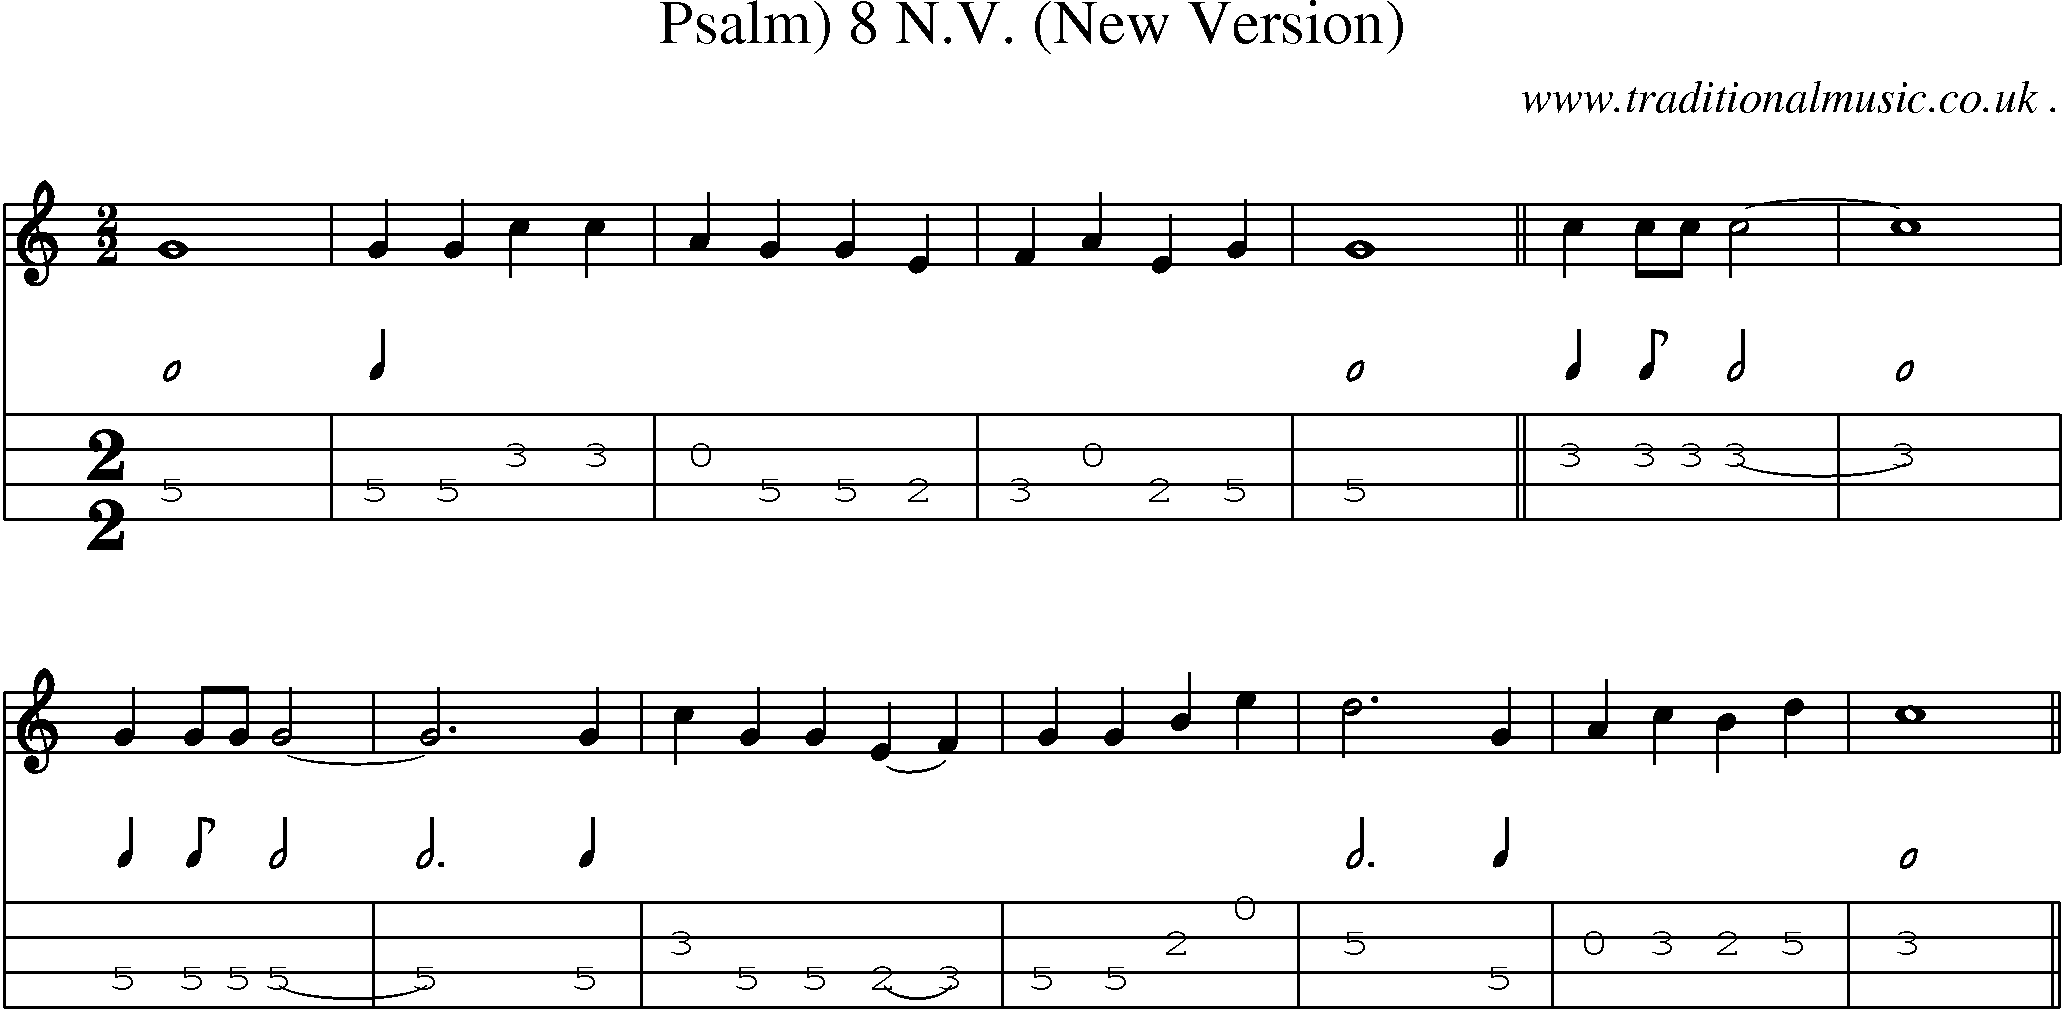 Sheet-Music and Mandolin Tabs for Psalm) 8 Nv (new Version)